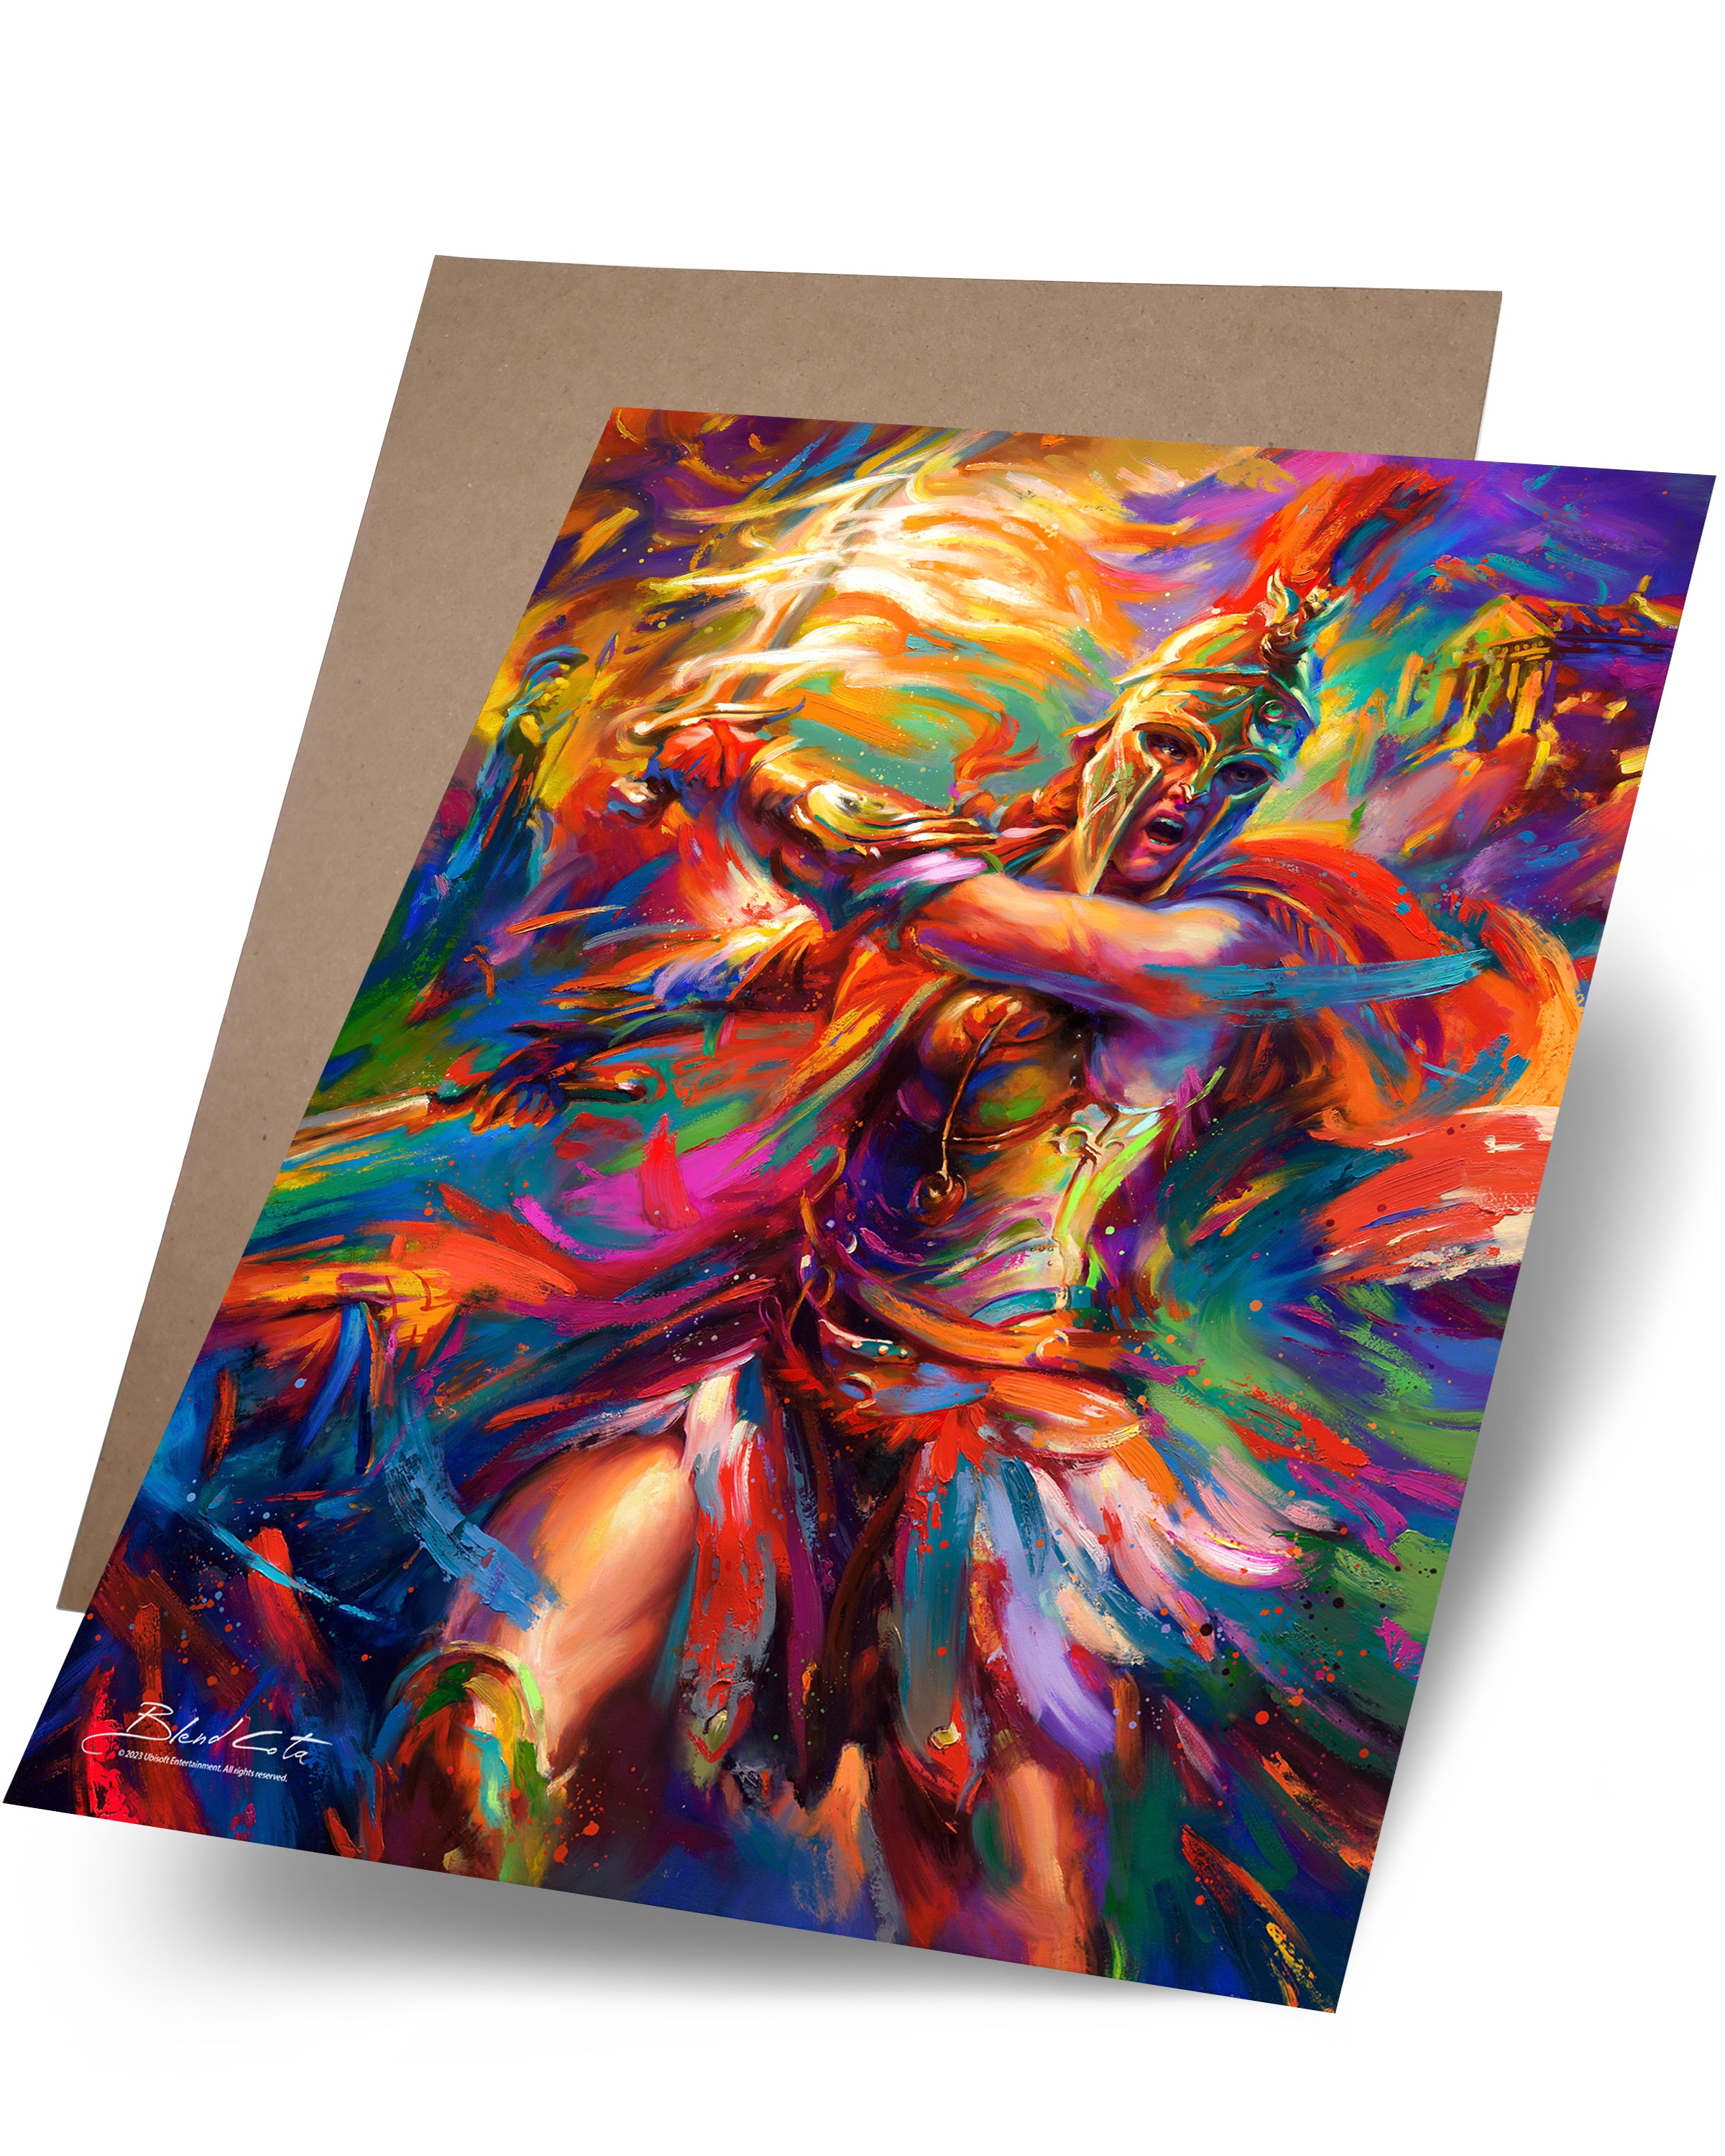 Paper print on cardstock of Assassin's Creed Kassandra of Odyssey bursting forth with energy and painted with colorful brushstrokes in an expressionistic style.